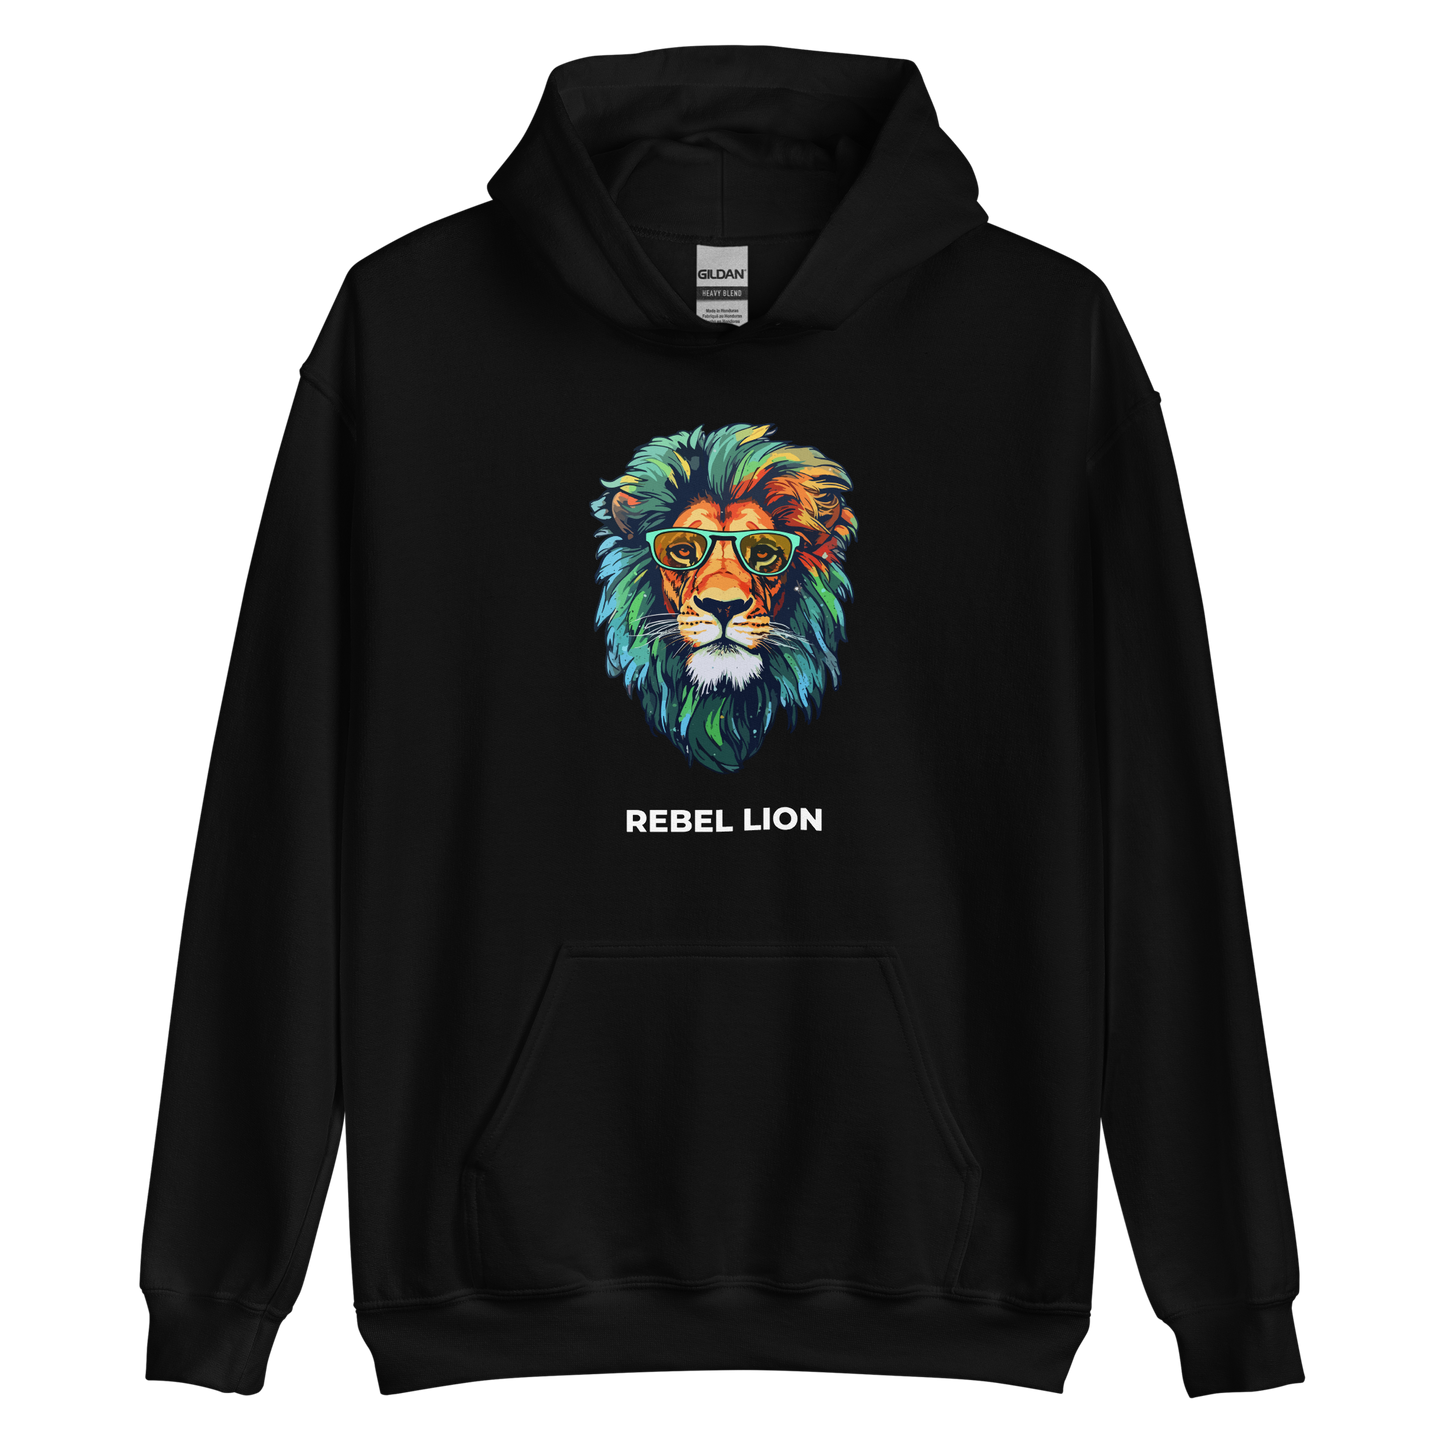 Black Lion Hoodie featuring a fierce Rebel Lion graphic on the chest - Funny Graphic Lion Hoodies - Boozy Fox